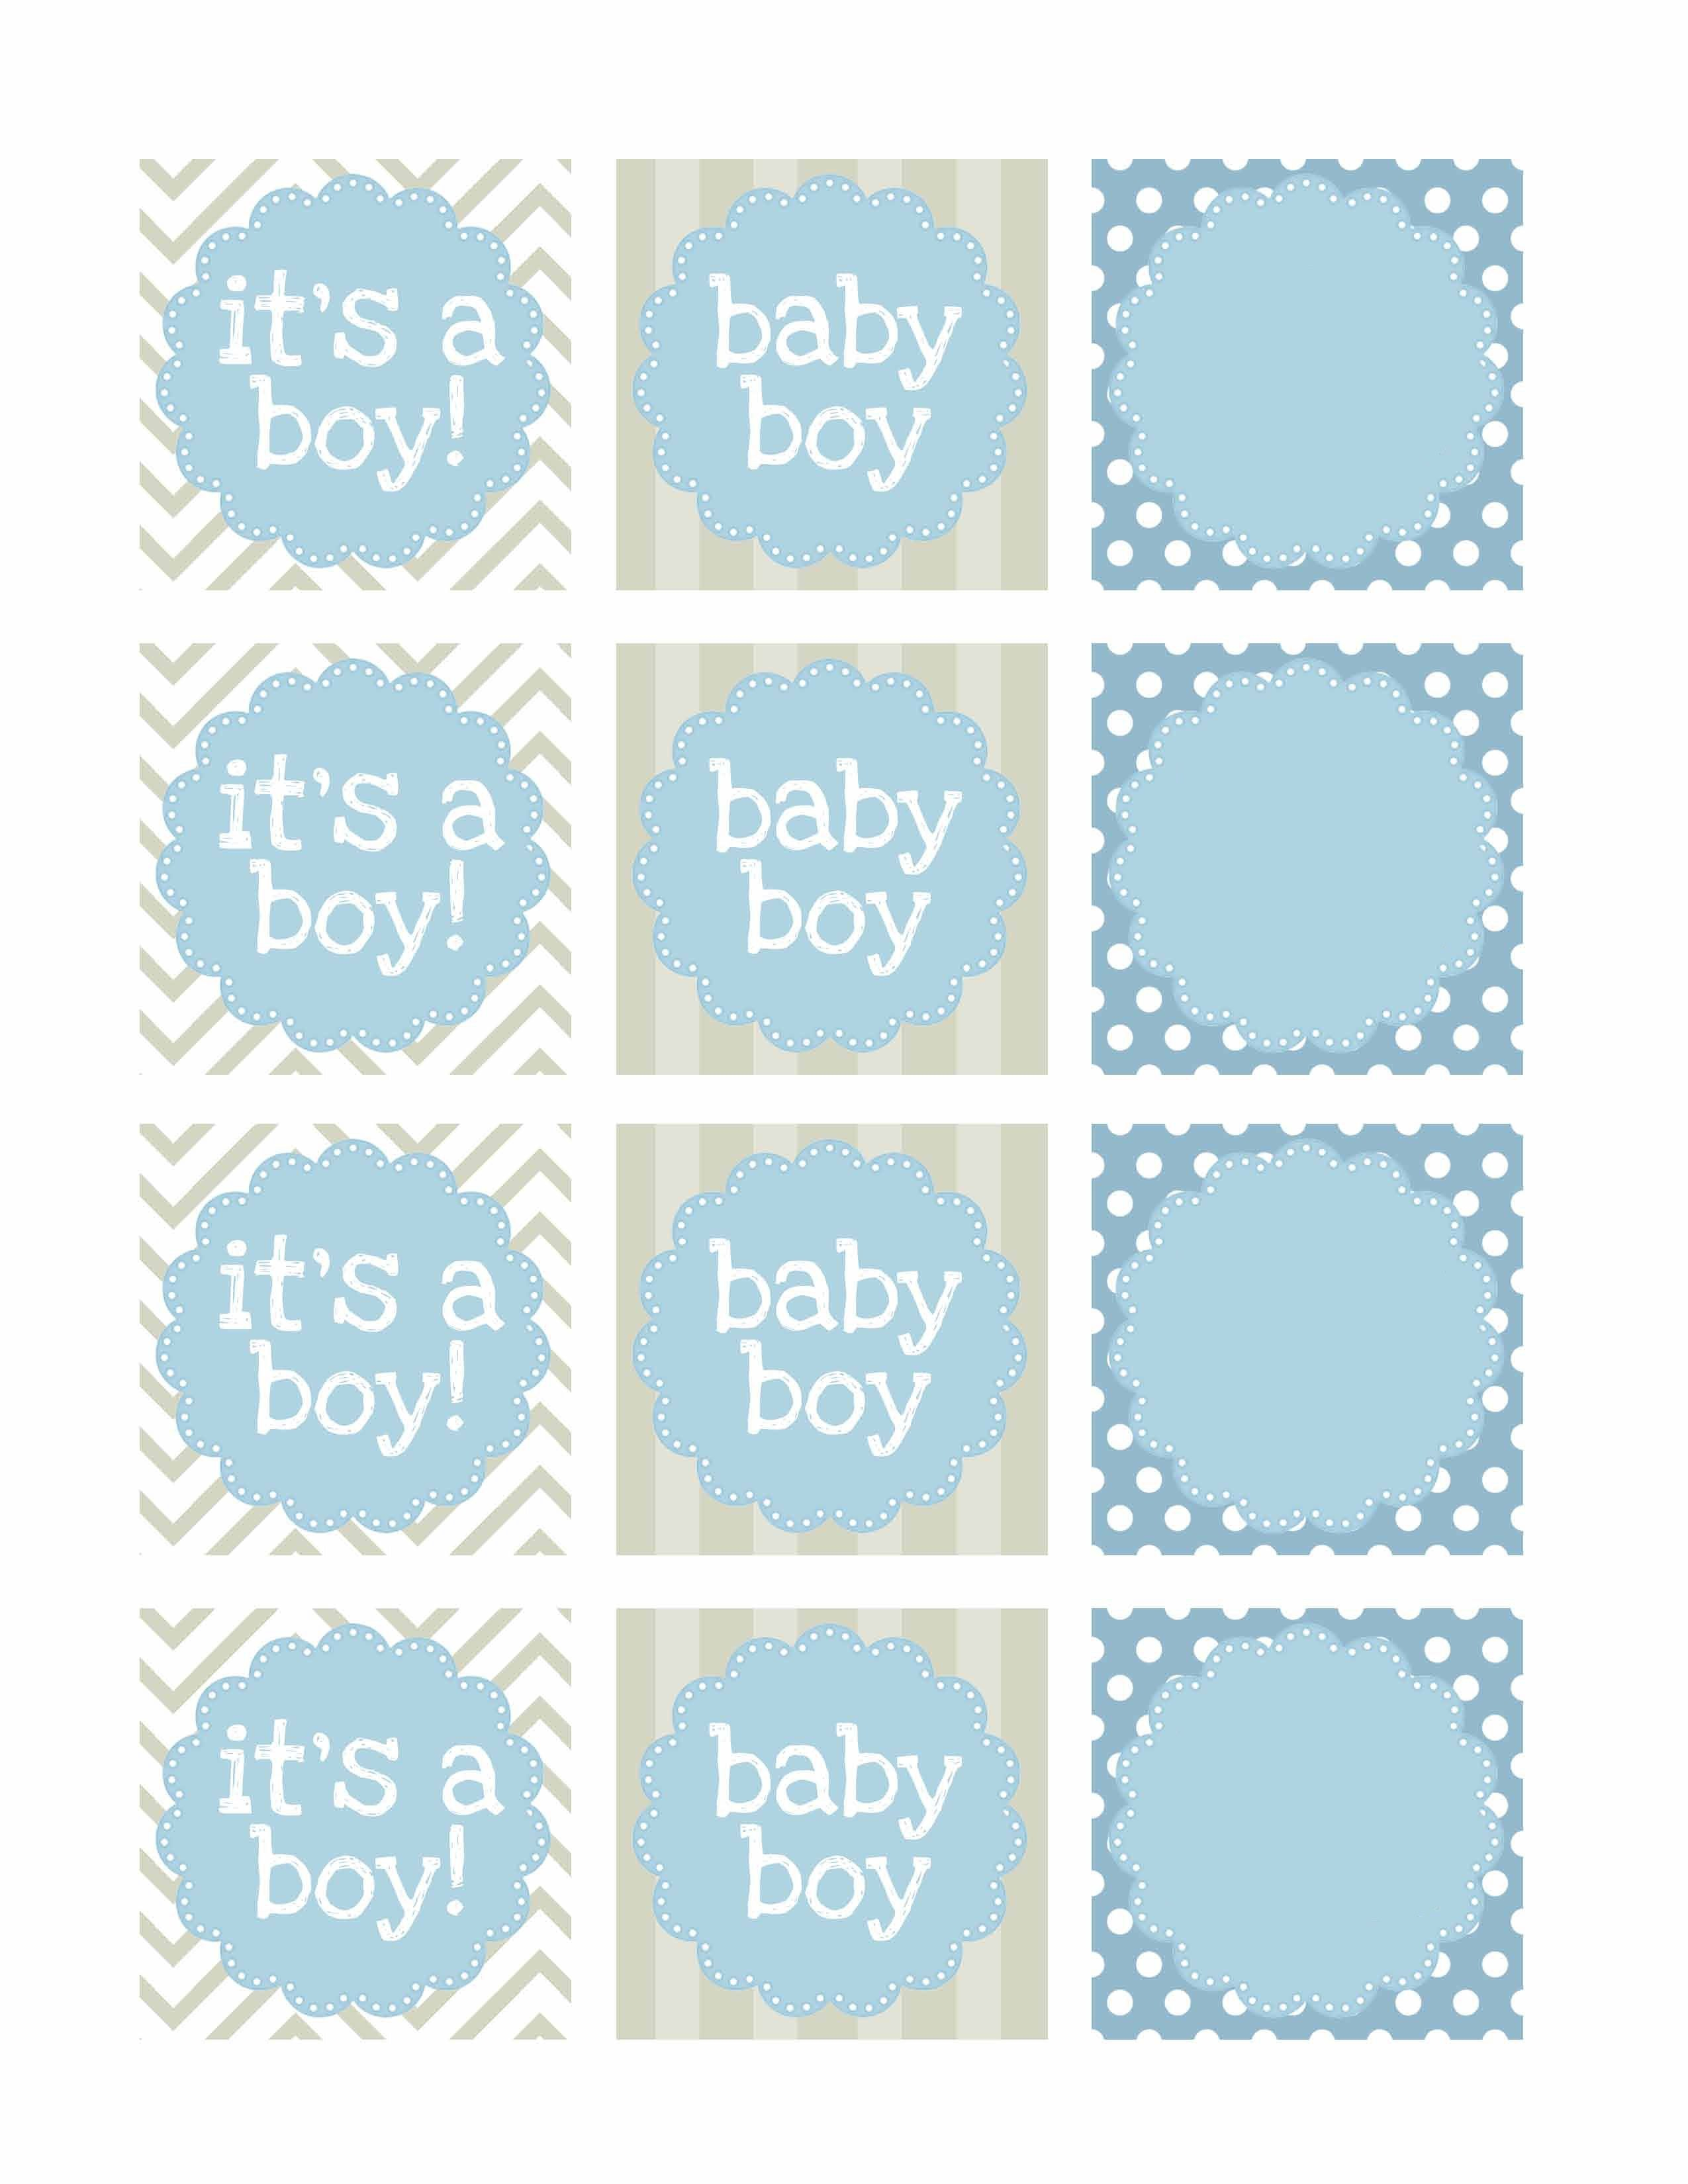 Boy Baby Shower Free Printables  Baby Shower  Baby Shower Labels inside Baby Shower Label Template For Favors